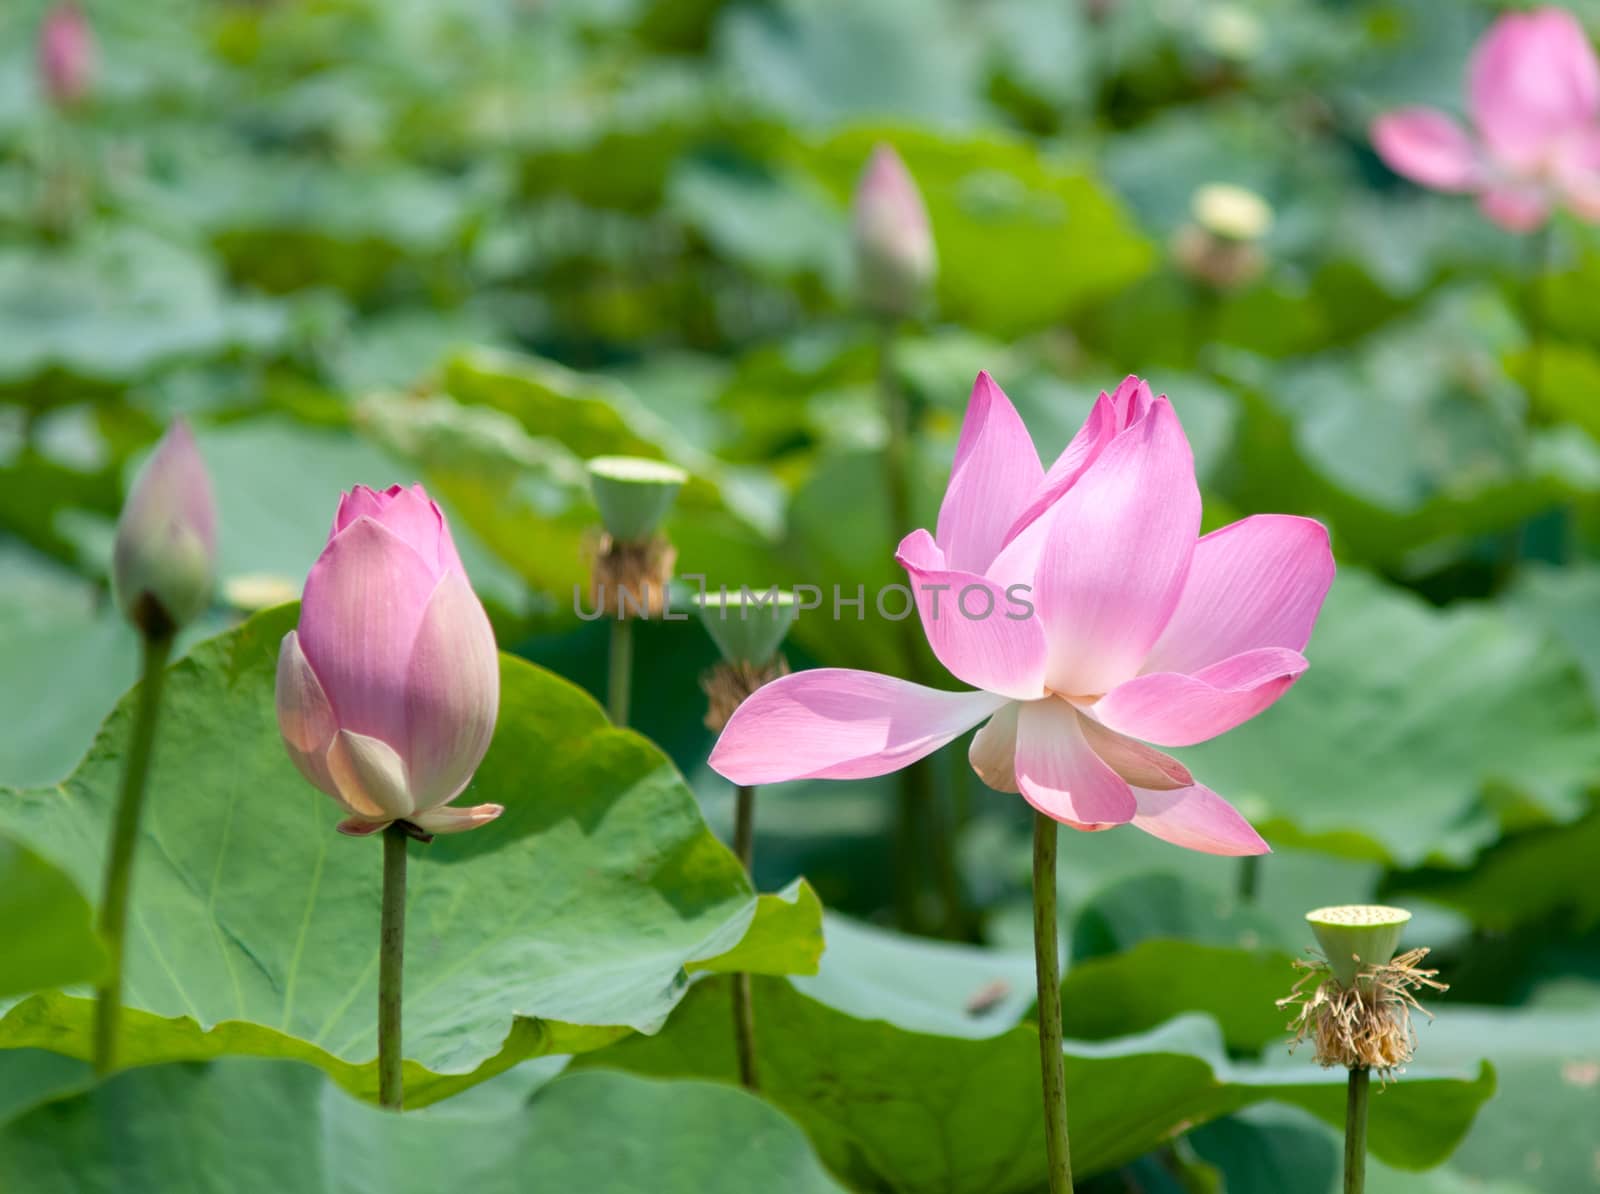 Lotus flower and Lotus flower plants by vietimages